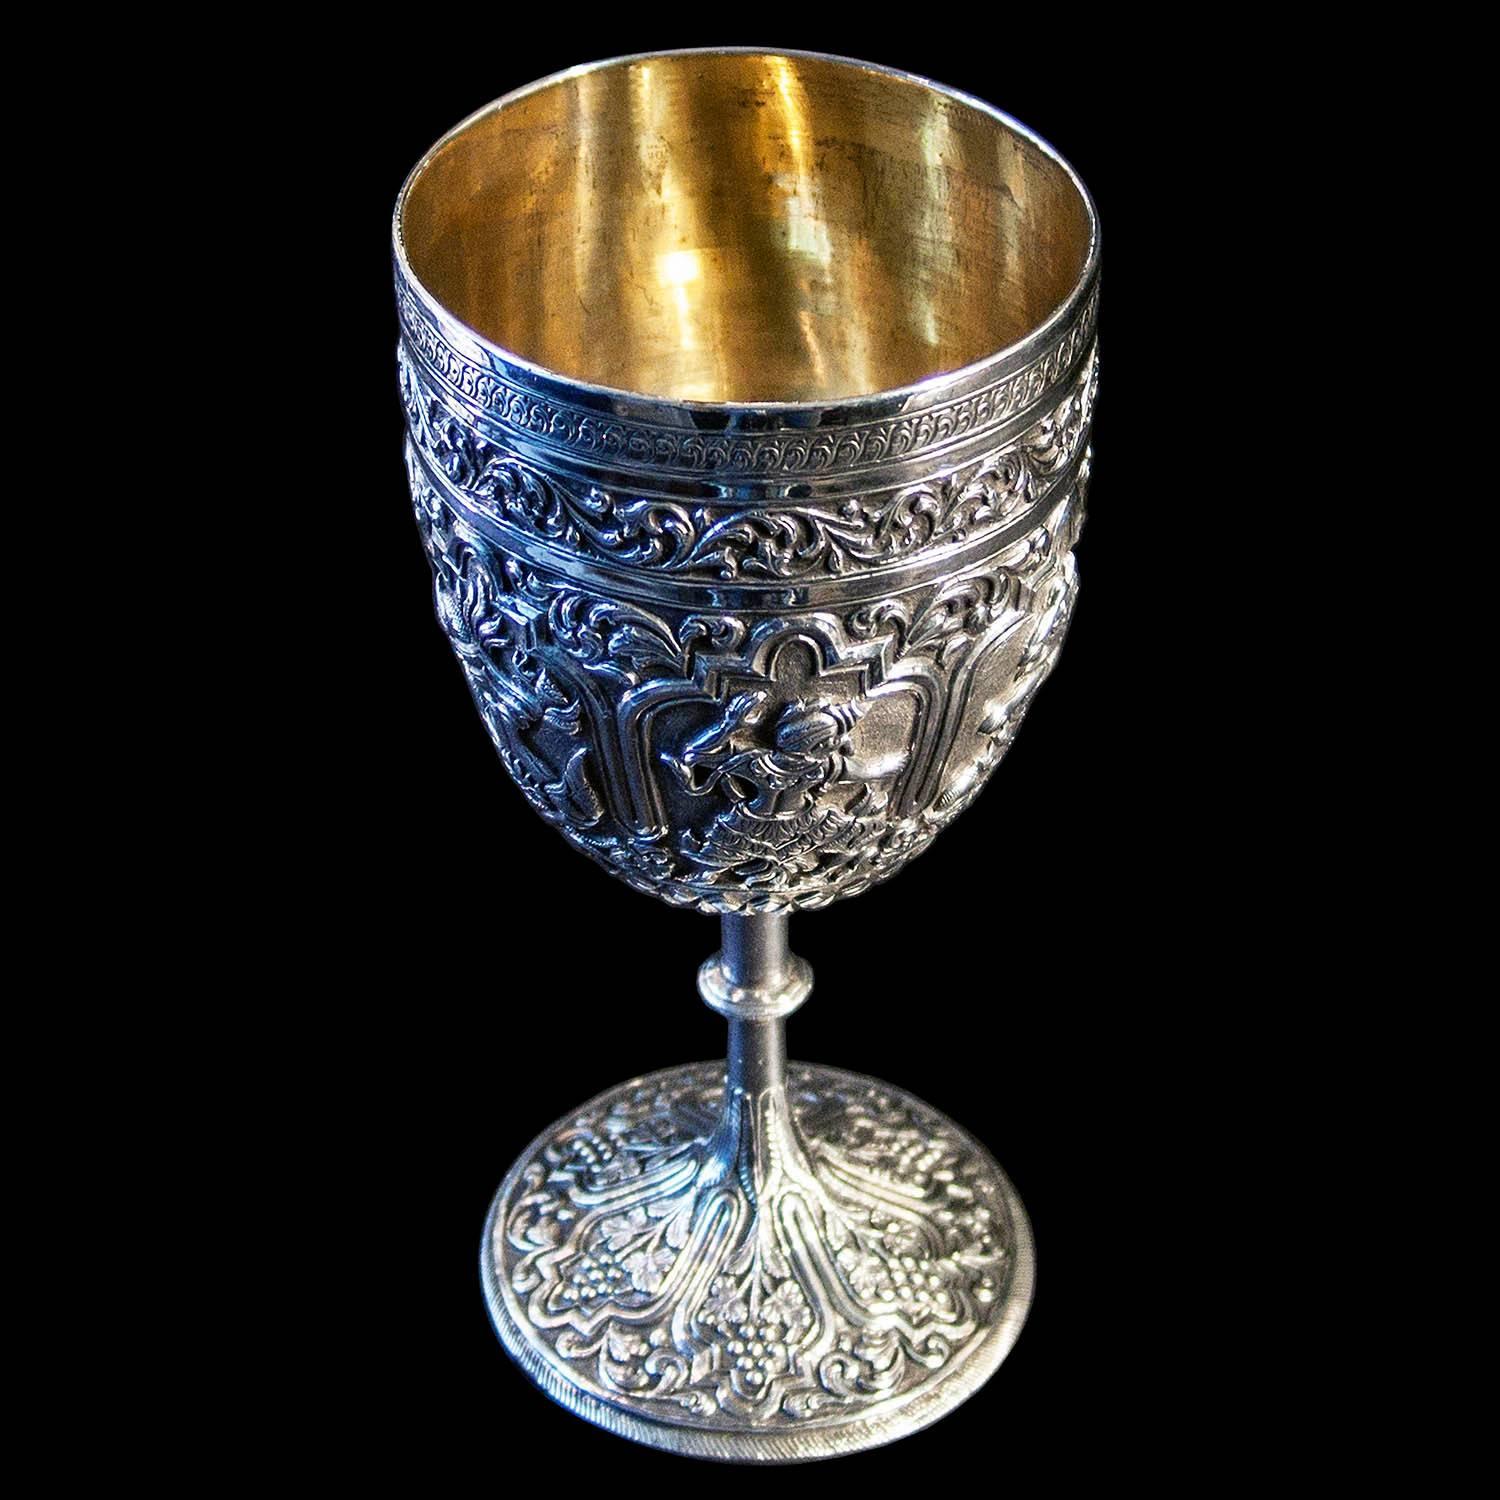 A heavy finely chased wine goblet with gilded interior. The surface of the cup embellished with figural panels.